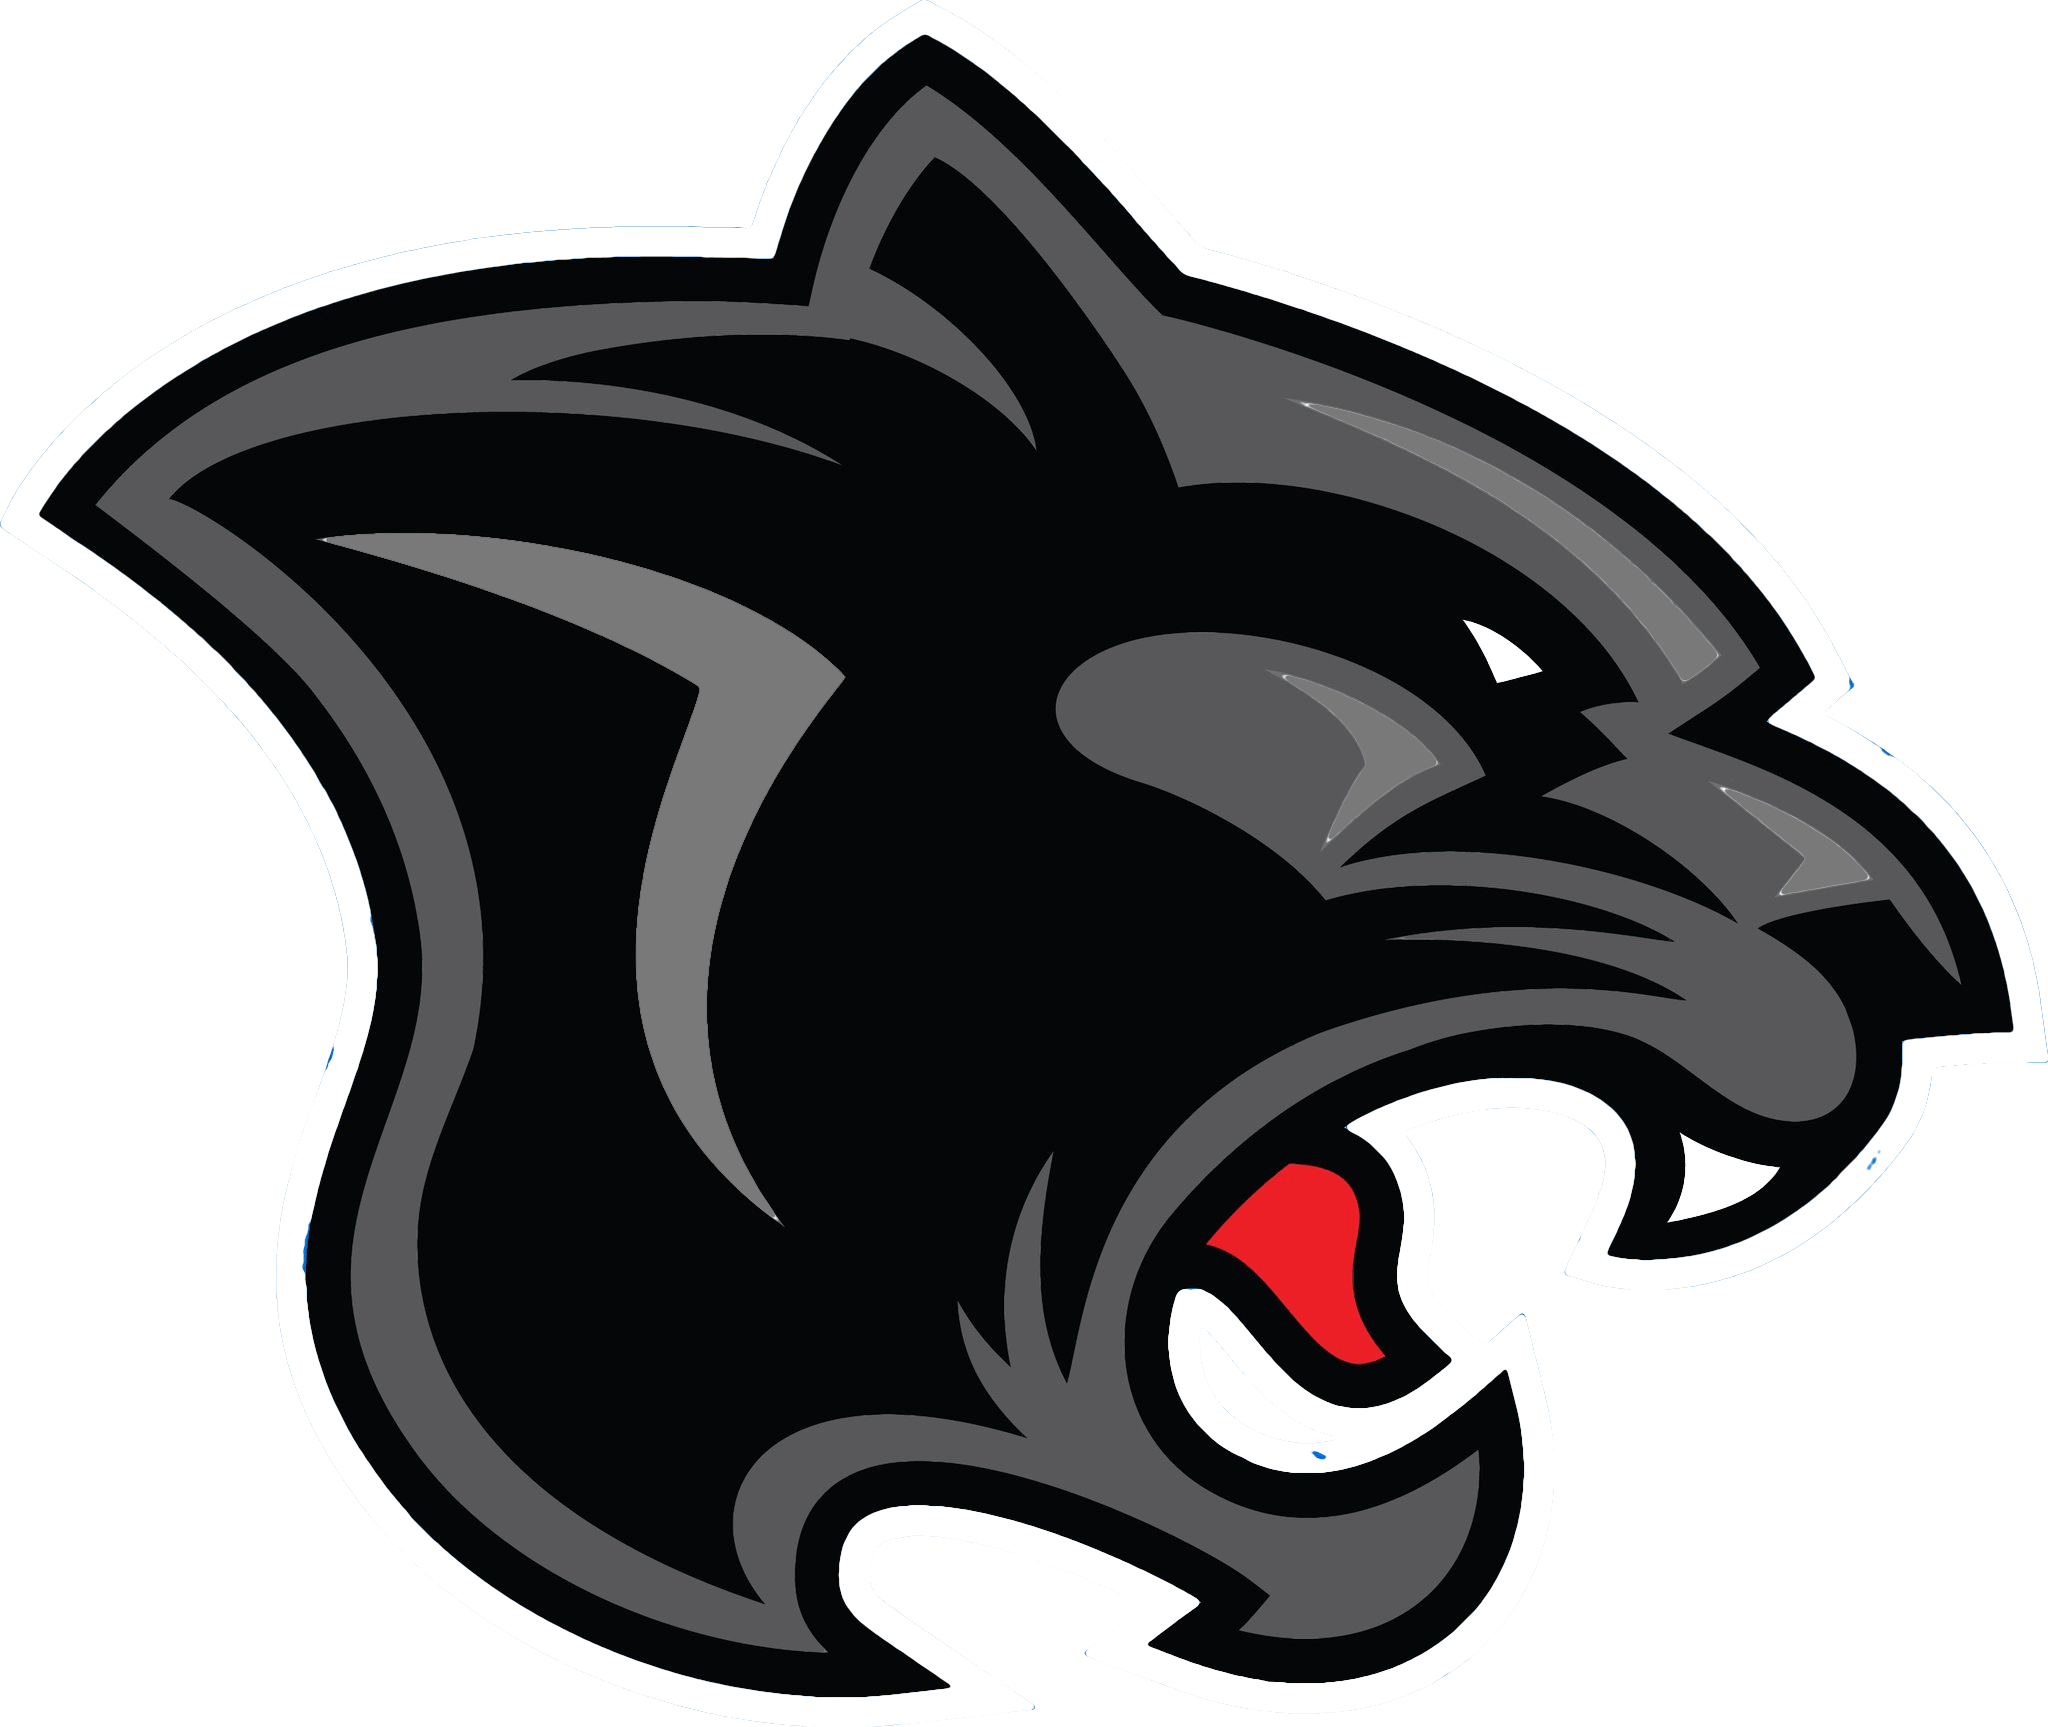 Panther Head Logo - 20 Black panther head png for free download on YA-webdesign